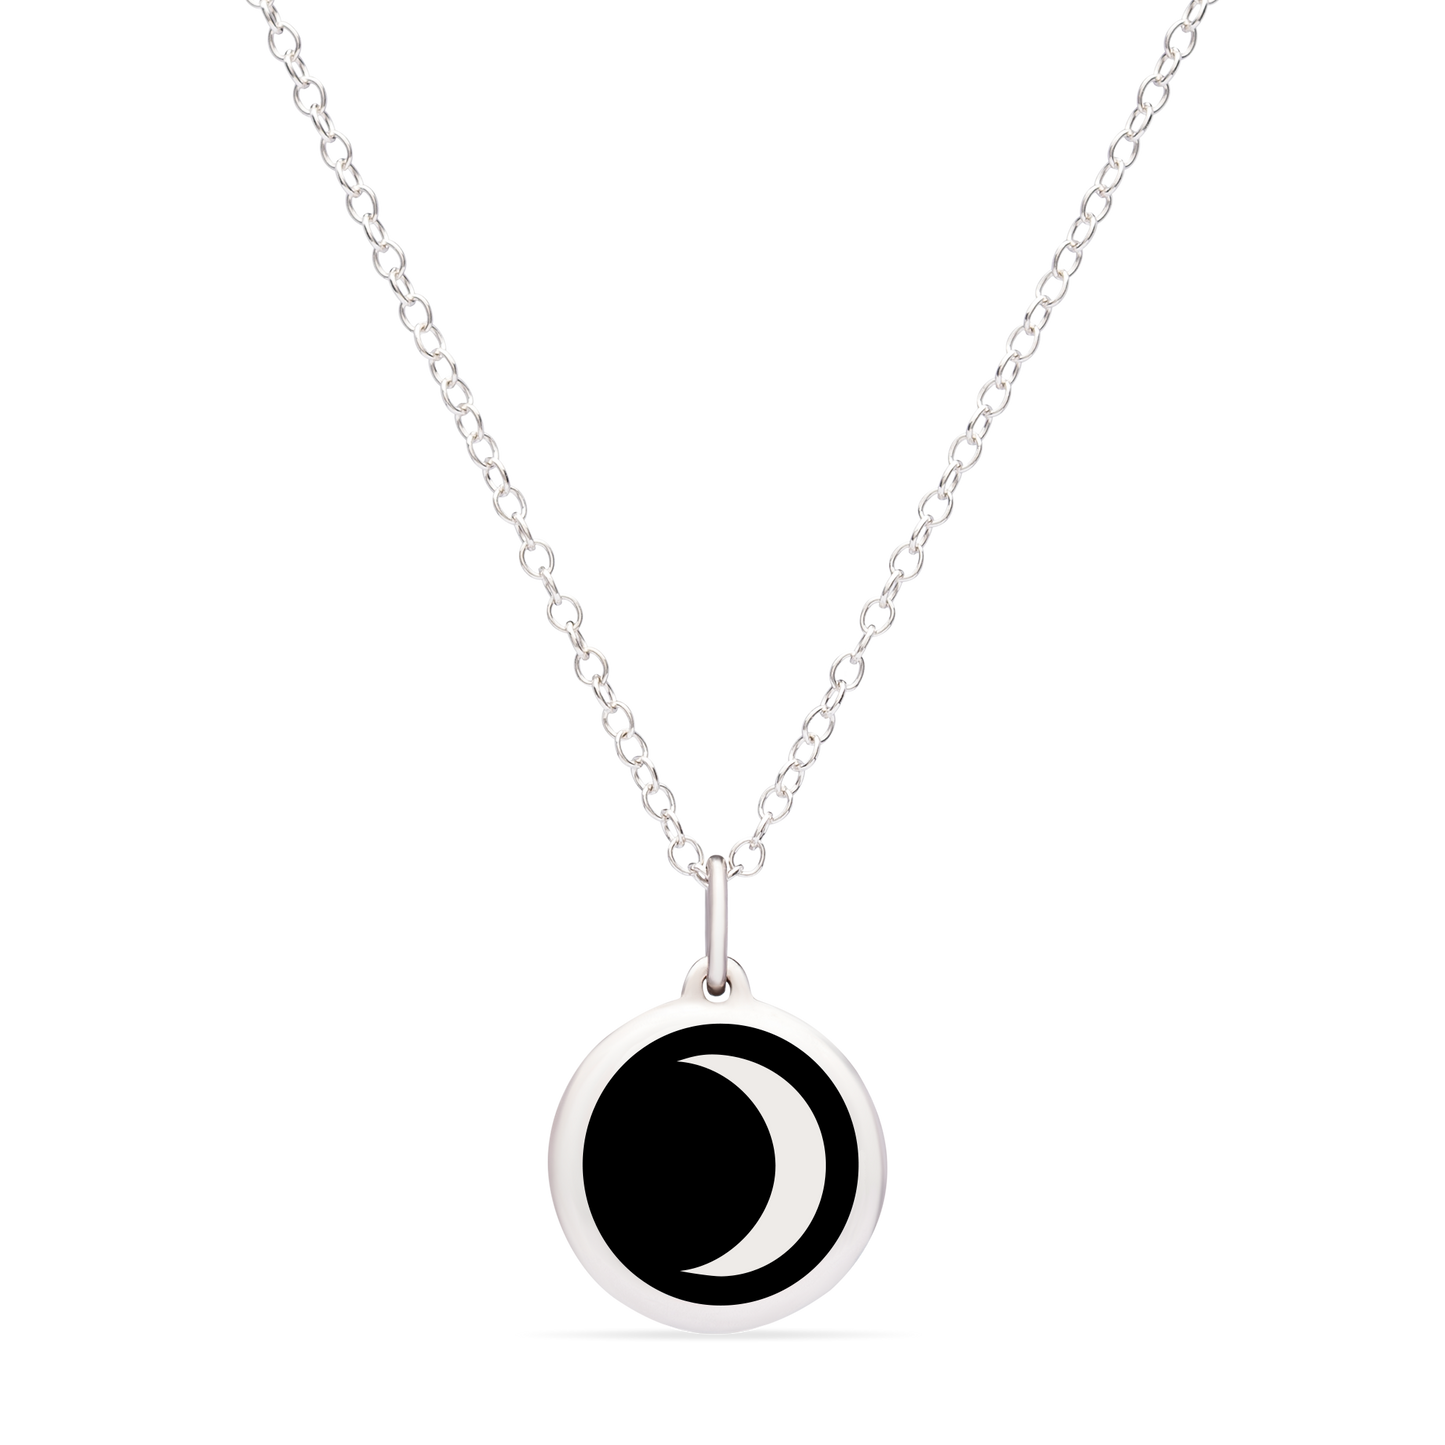 MINI MOON CHARM sterling silver with rhodium plate